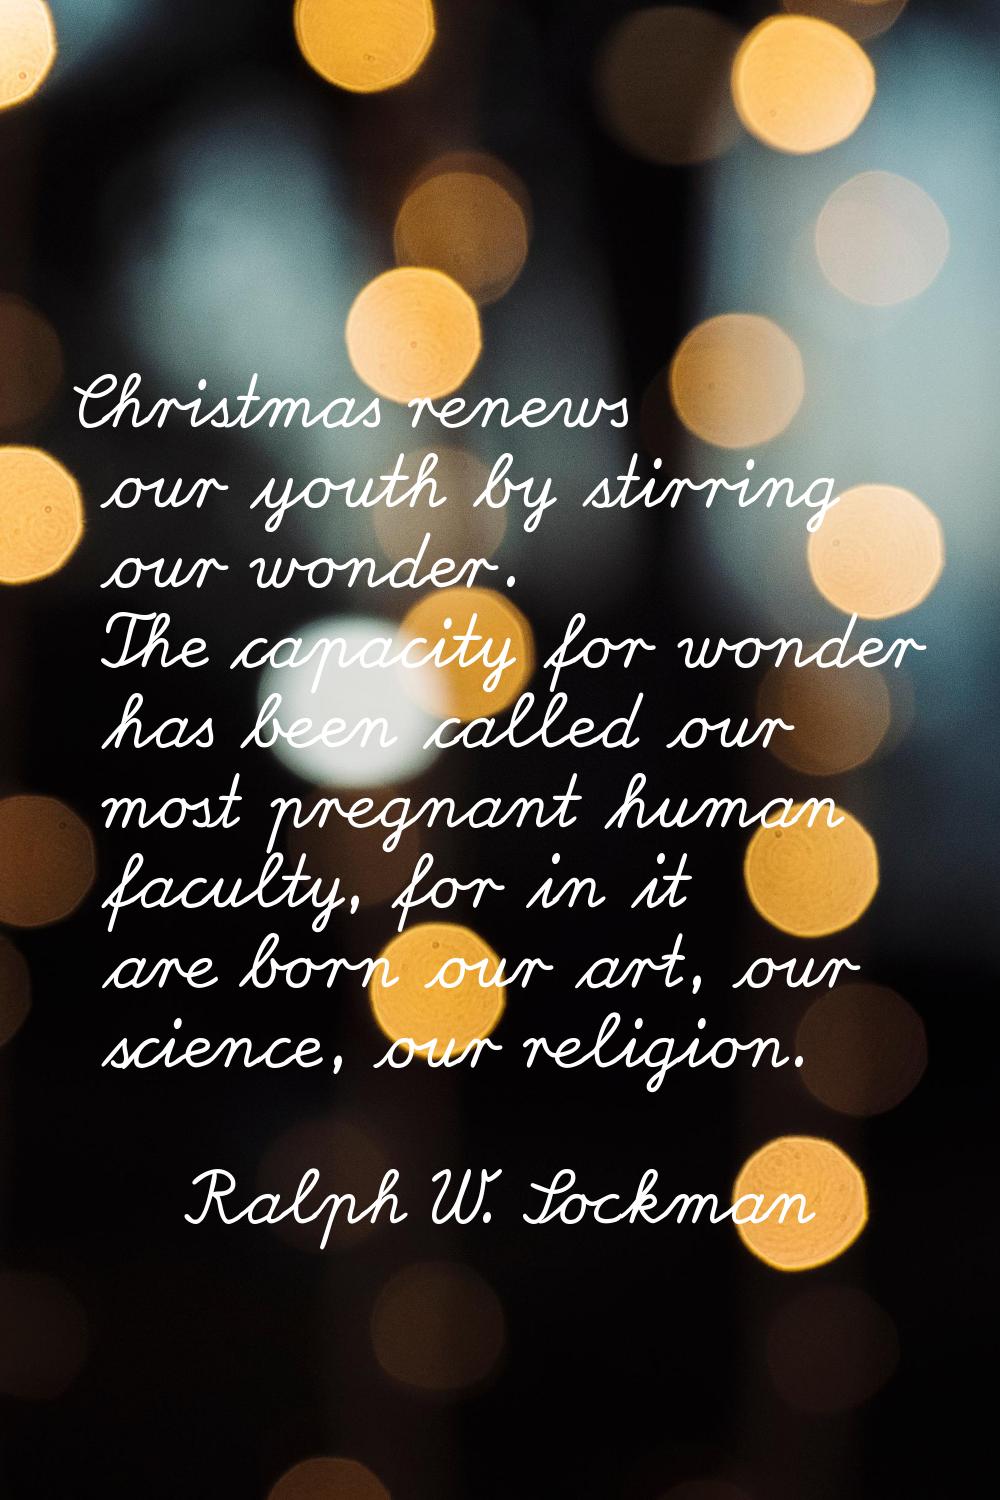 Christmas renews our youth by stirring our wonder. The capacity for wonder has been called our most